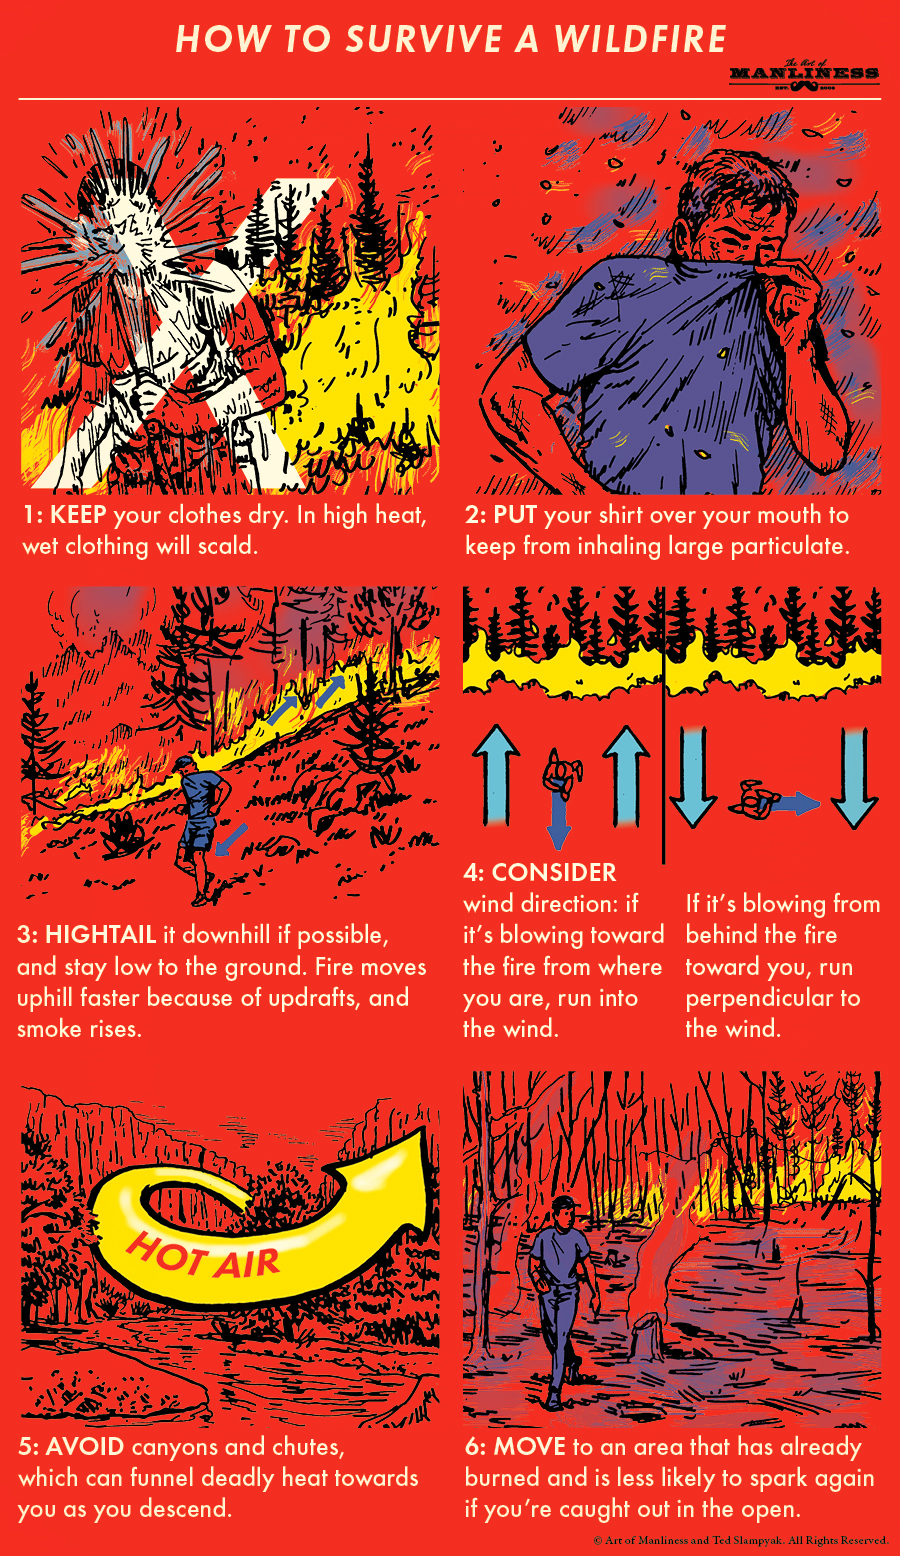 How to survive a wilderness emergency poster.